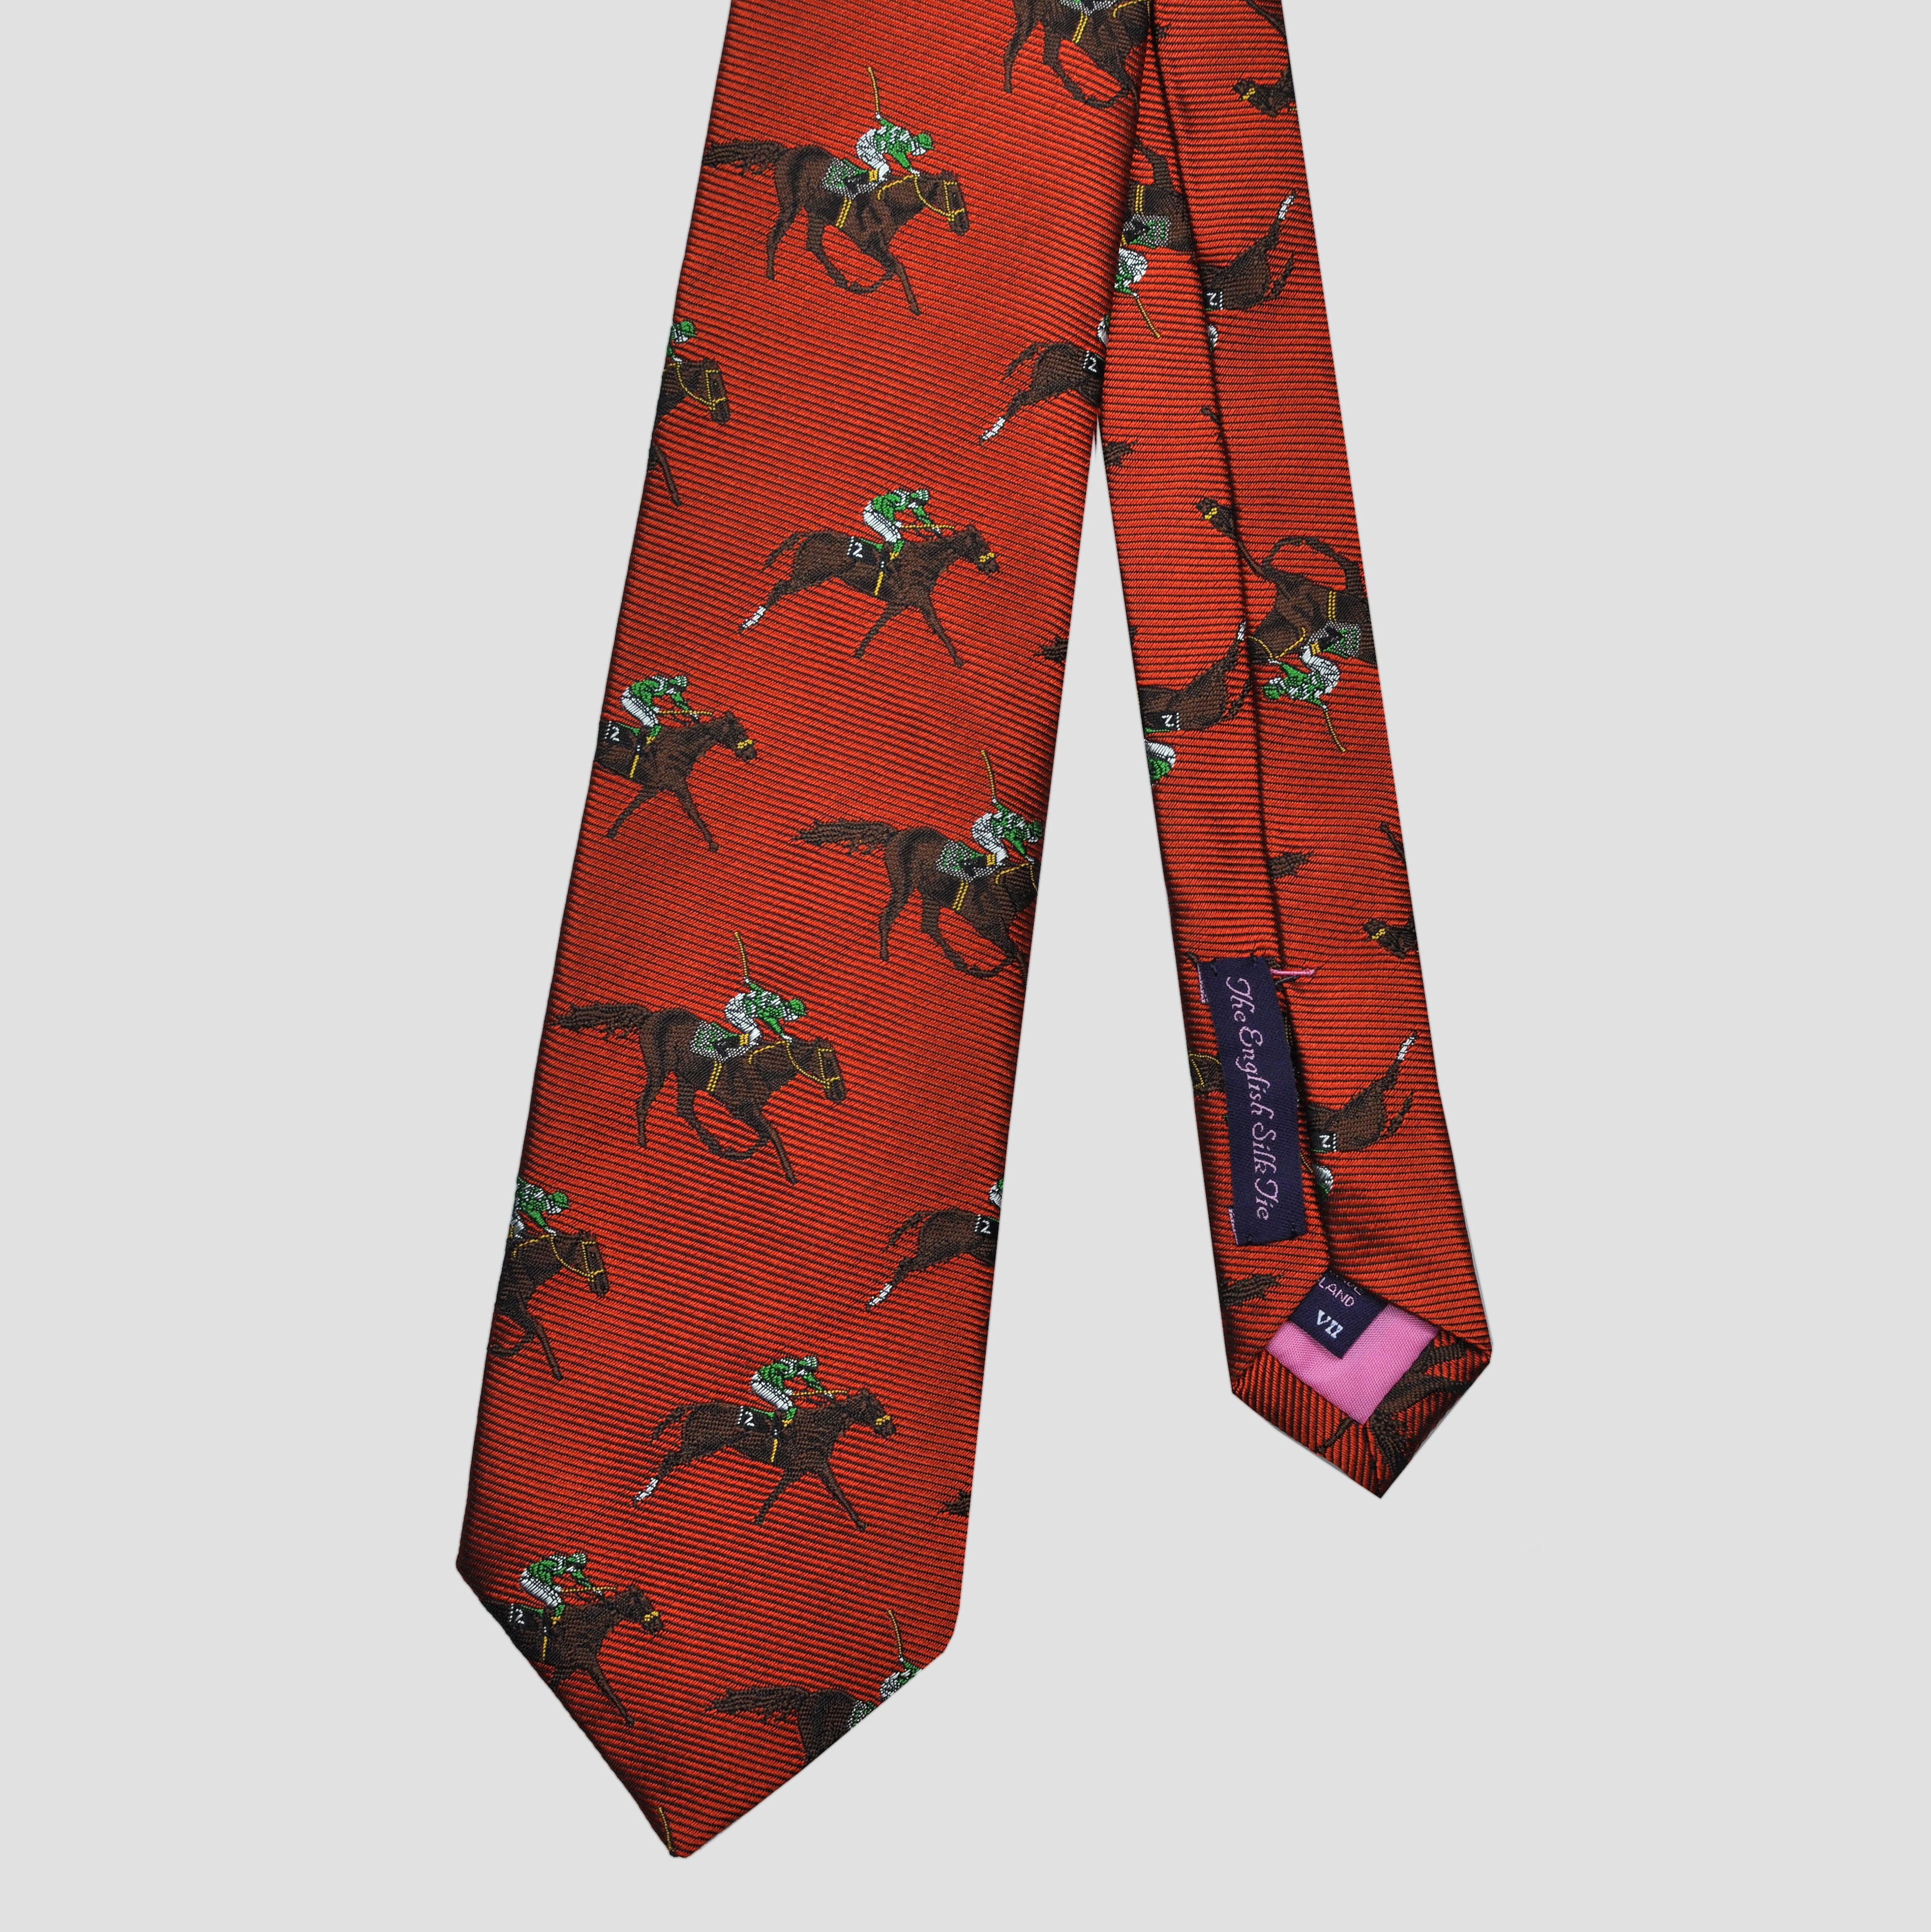 English Woven Silk 'At the Races' Tie in Orange